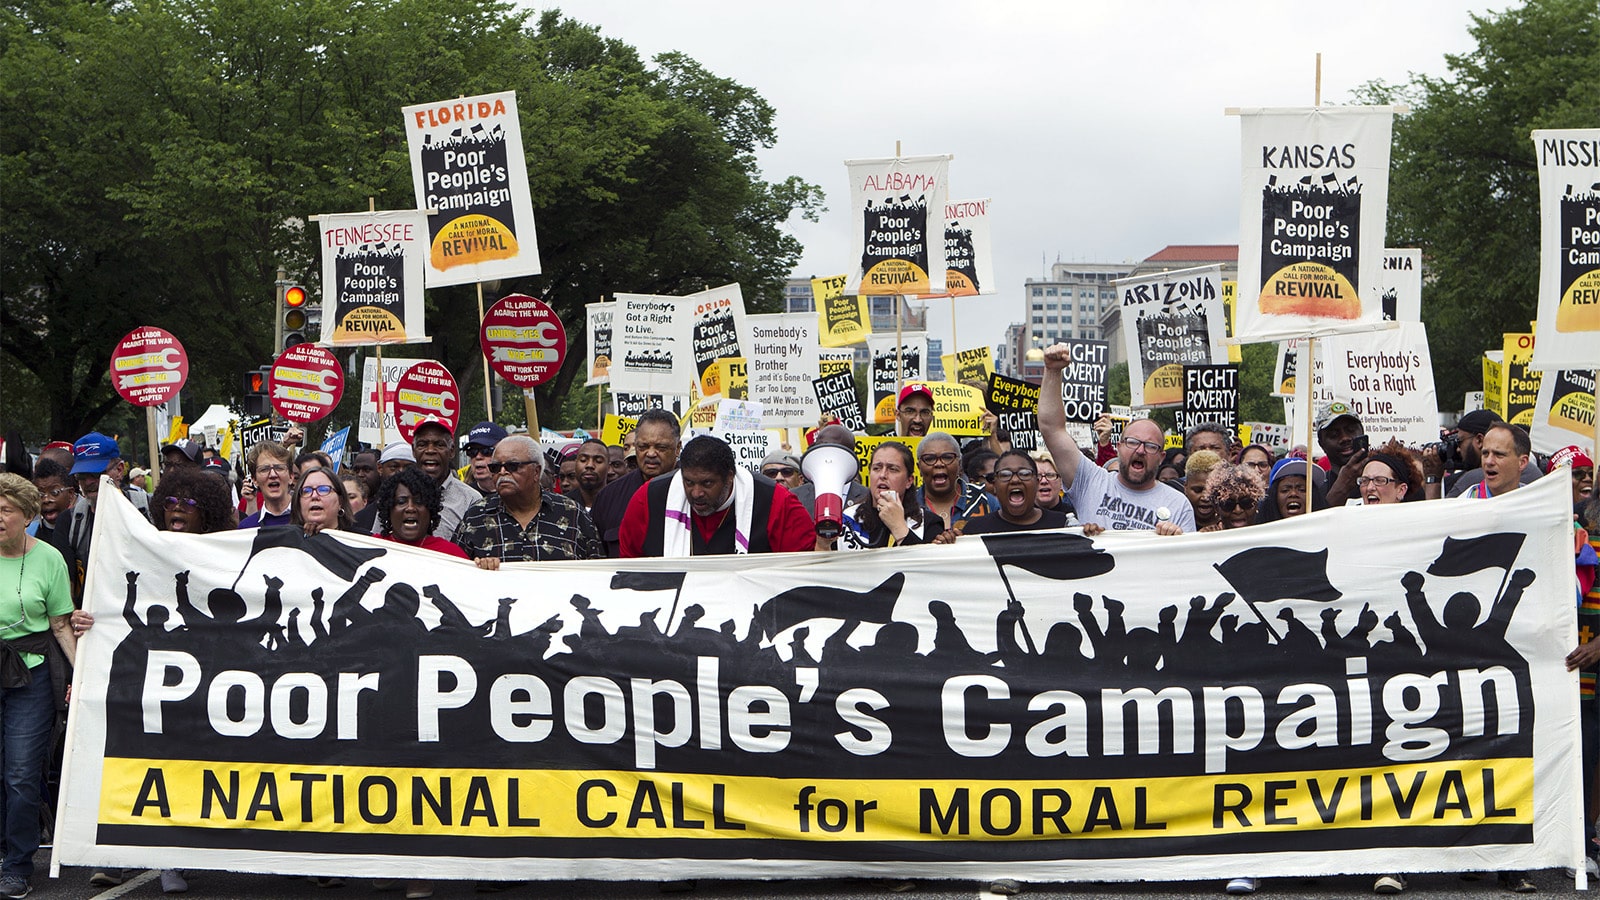 Demonstrators march outside the U.S. Capitol during the Poor People's Campaign rally at the National Mall in Washington on June 23, 2018. (AP Photo/Jose Luis Magana)